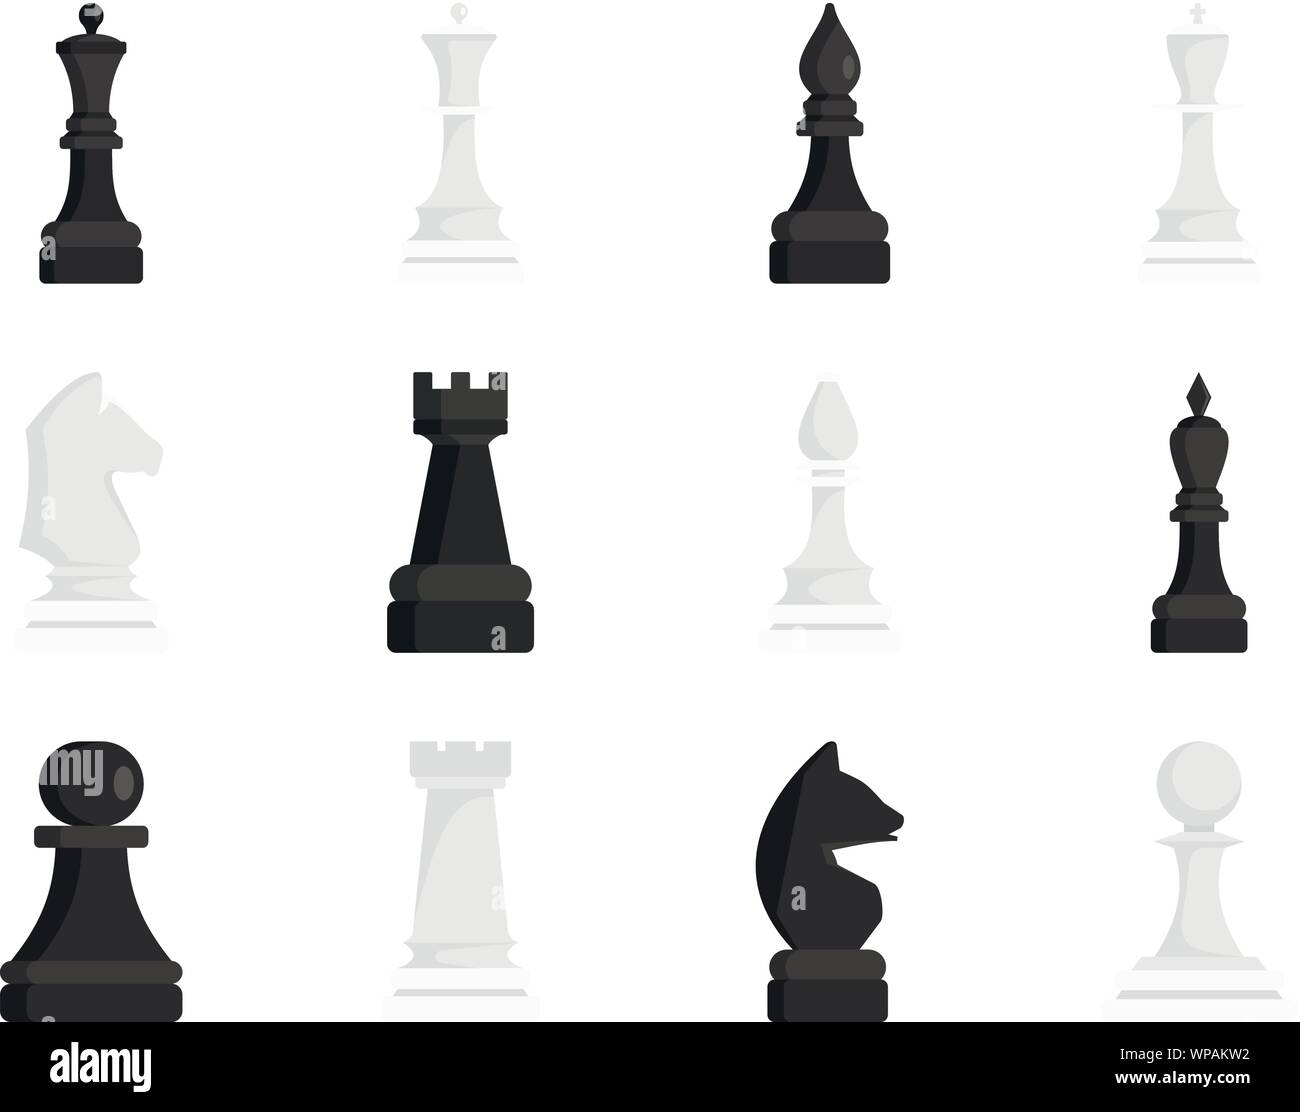 Premium Vector  Chess figures vector set. king, queen, bishop, knight or  horse, rook and pawn - standard chess pieces. strategic board game for  intellectual leisure. black and white items.